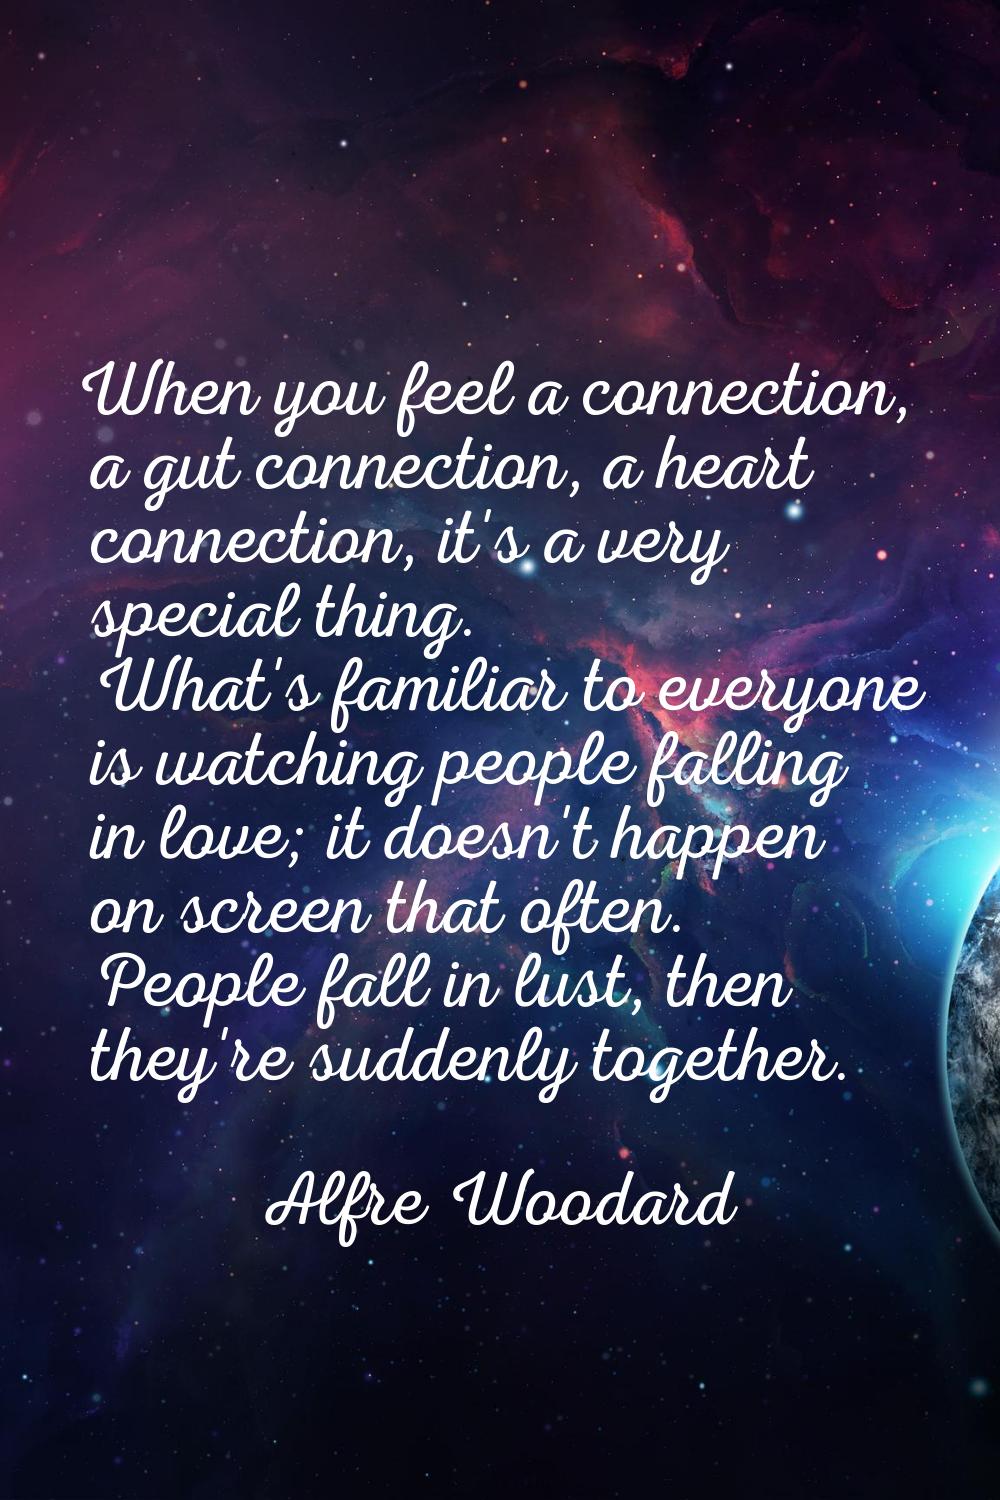 When you feel a connection, a gut connection, a heart connection, it's a very special thing. What's